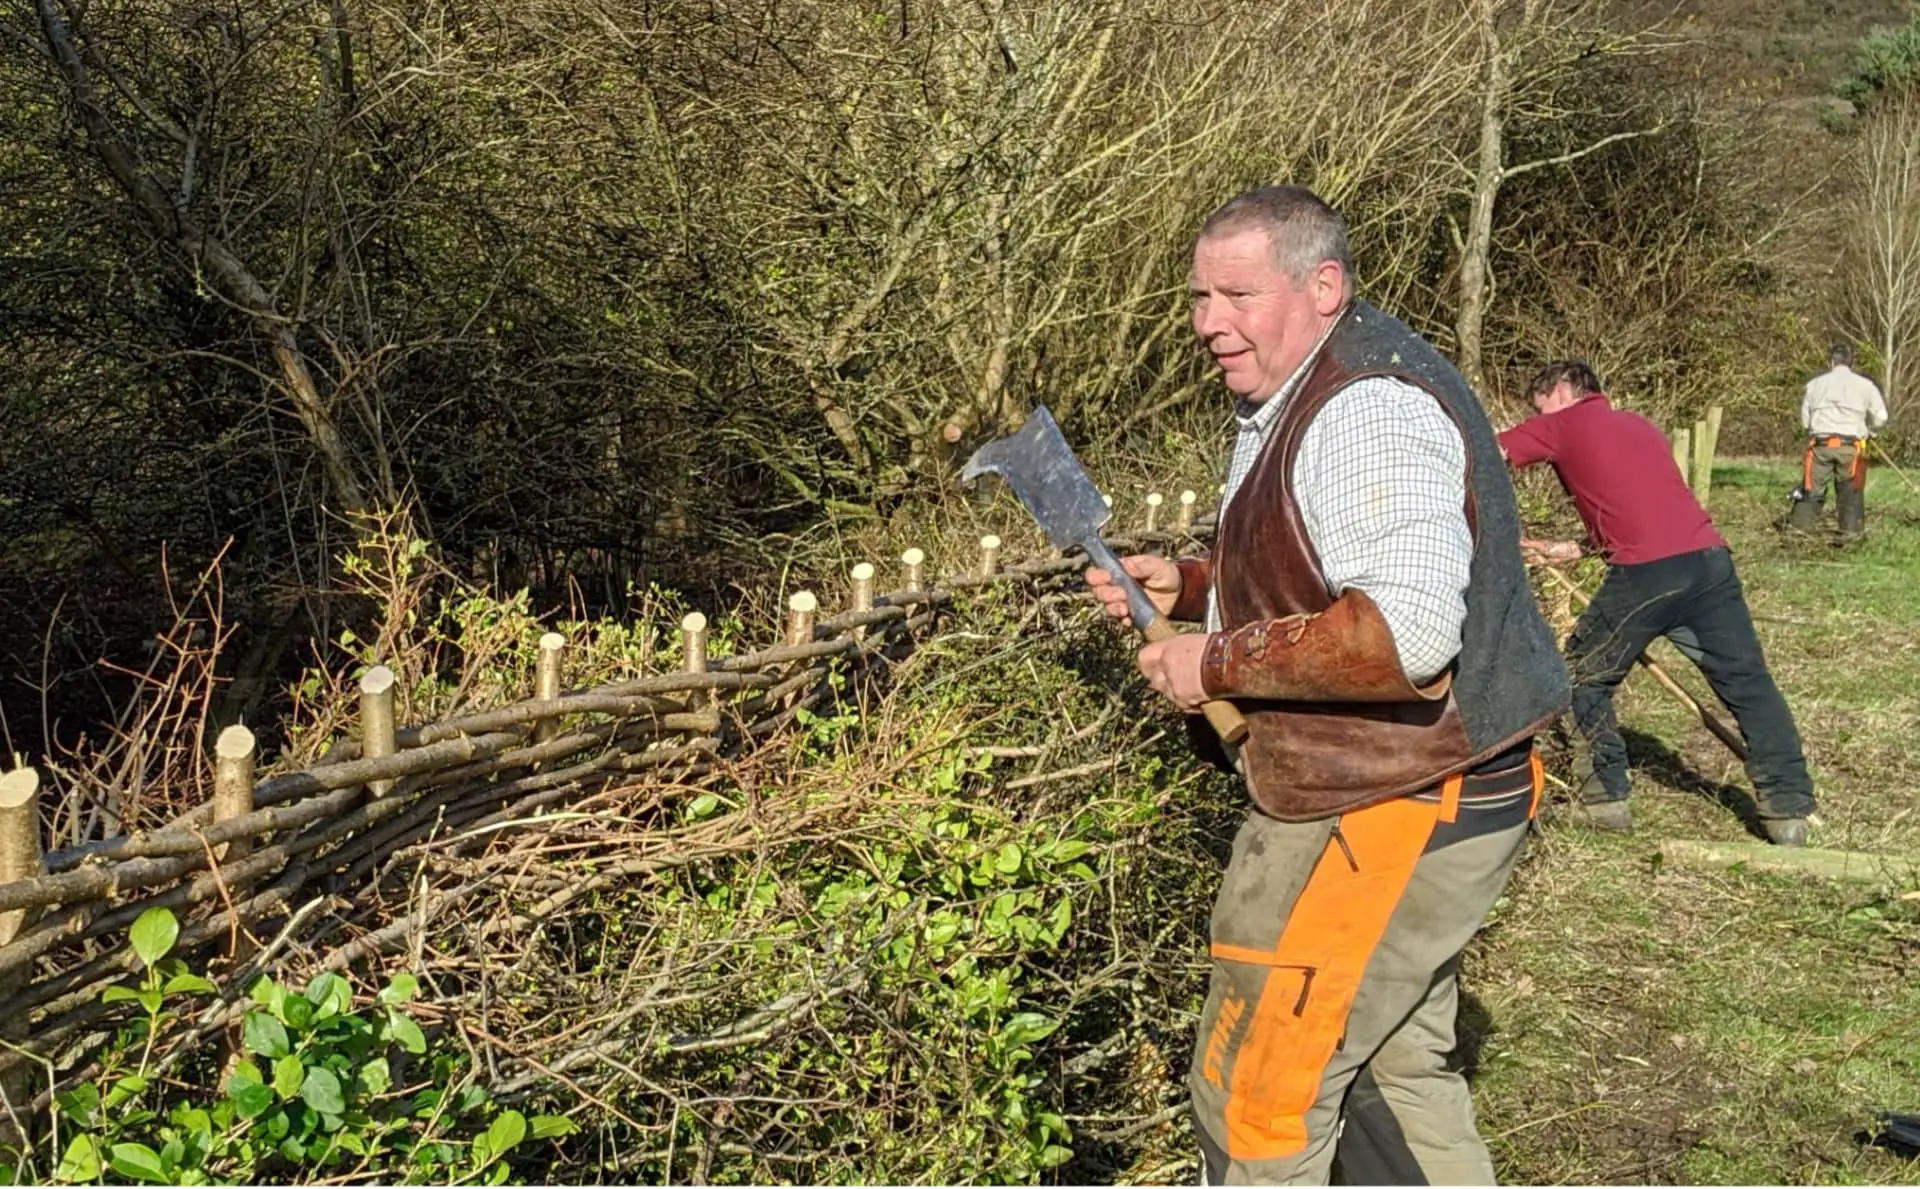 Three men taking part in Hedgelaying Competition